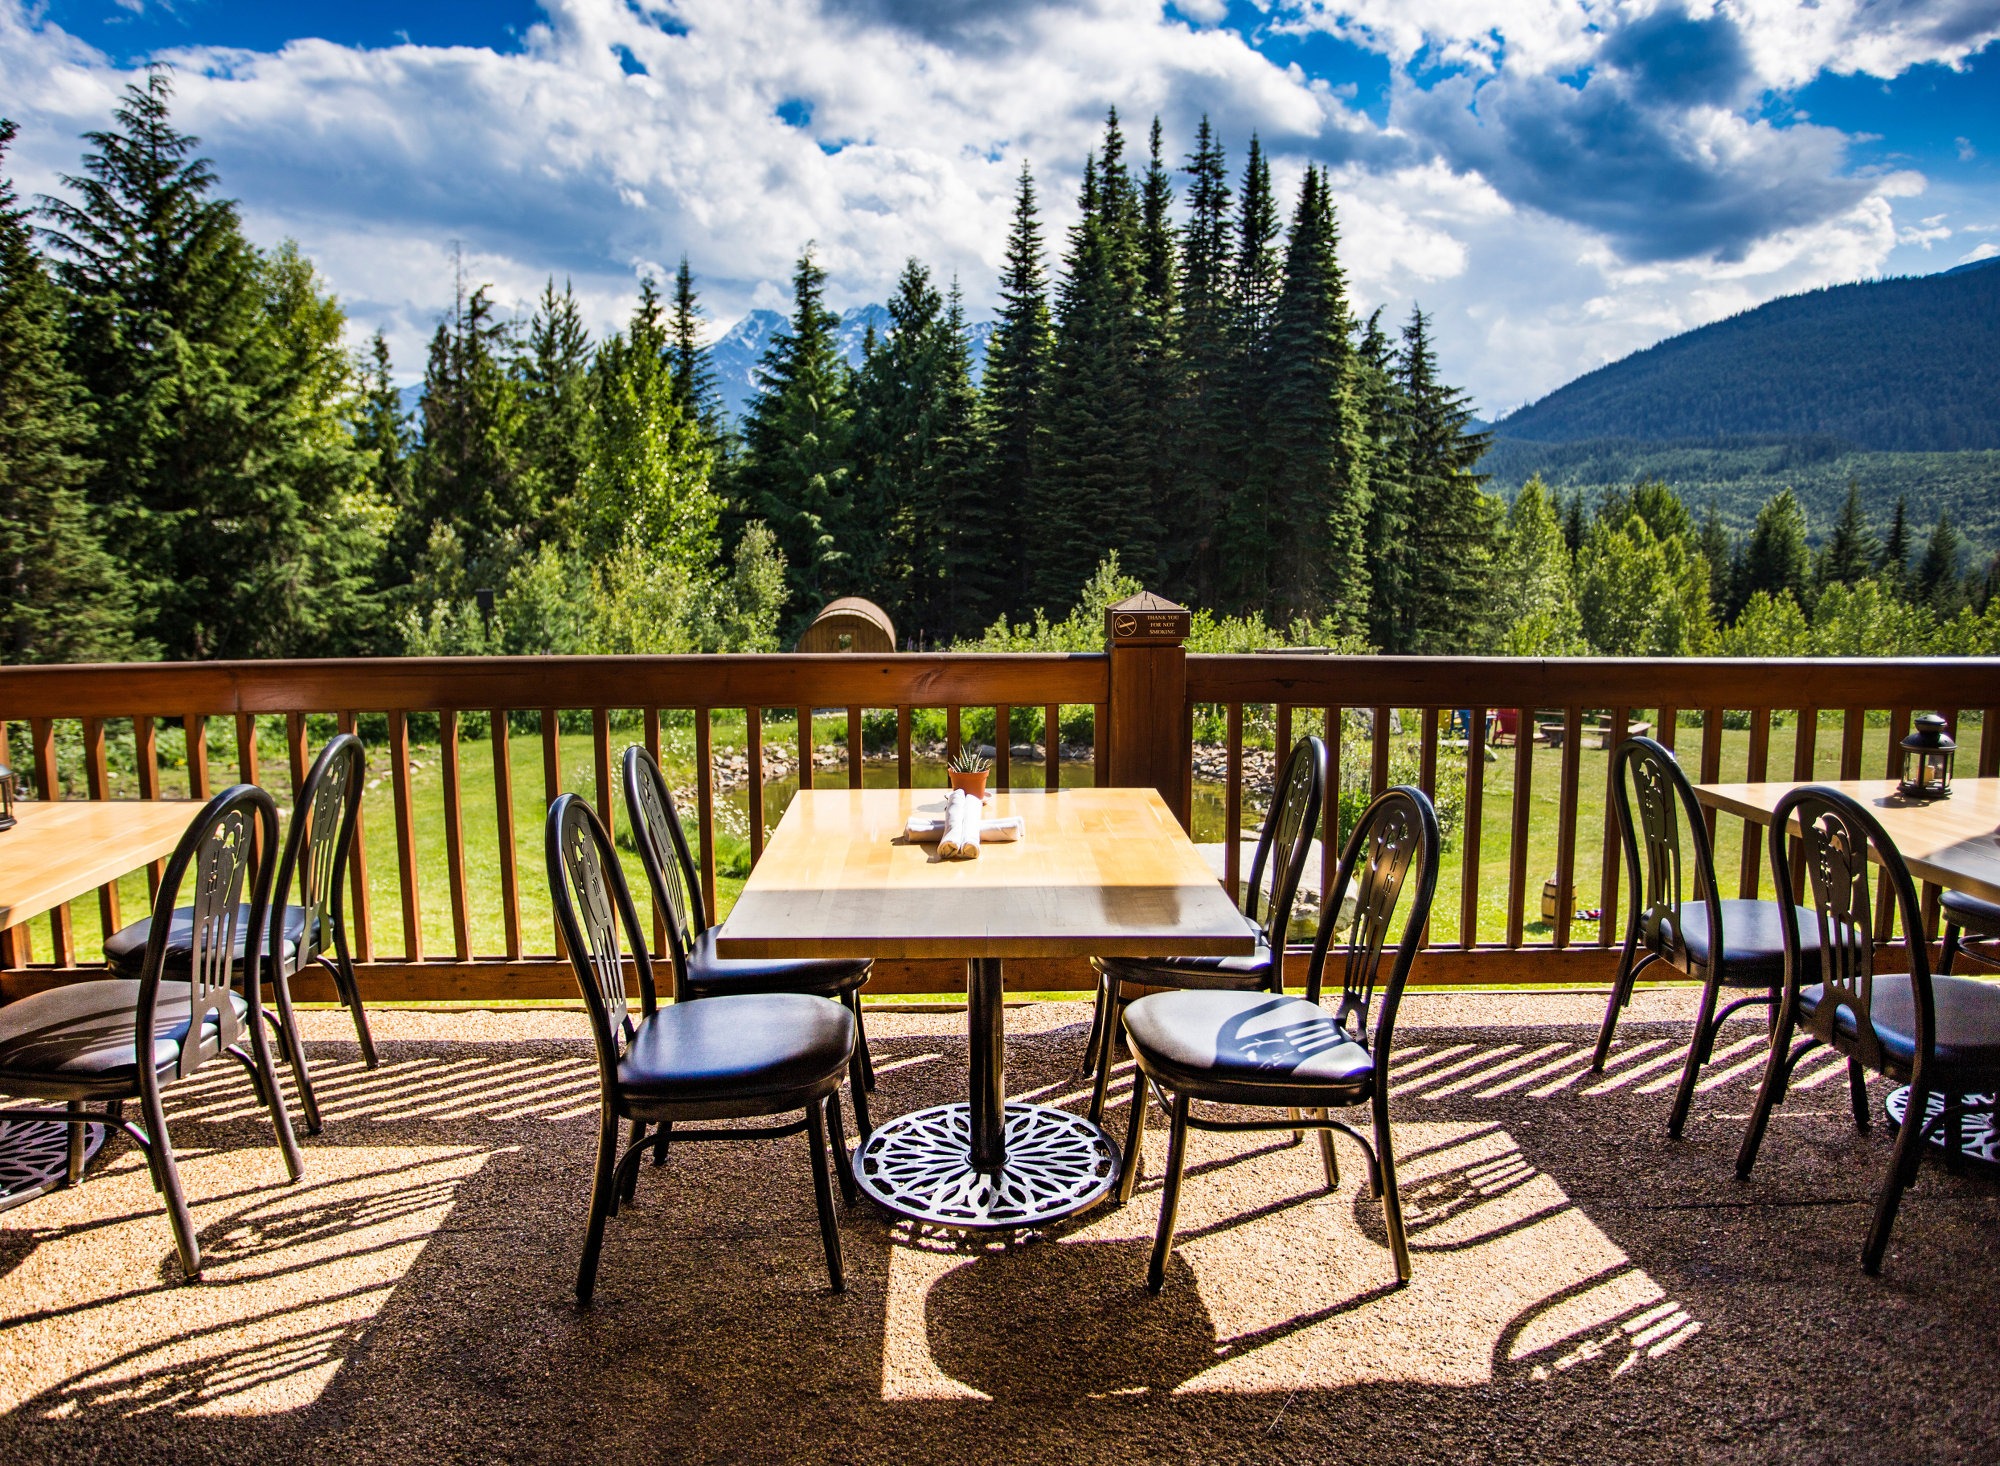 Table with four seats on the balcony on a sunny day with a view of the mountains and trees